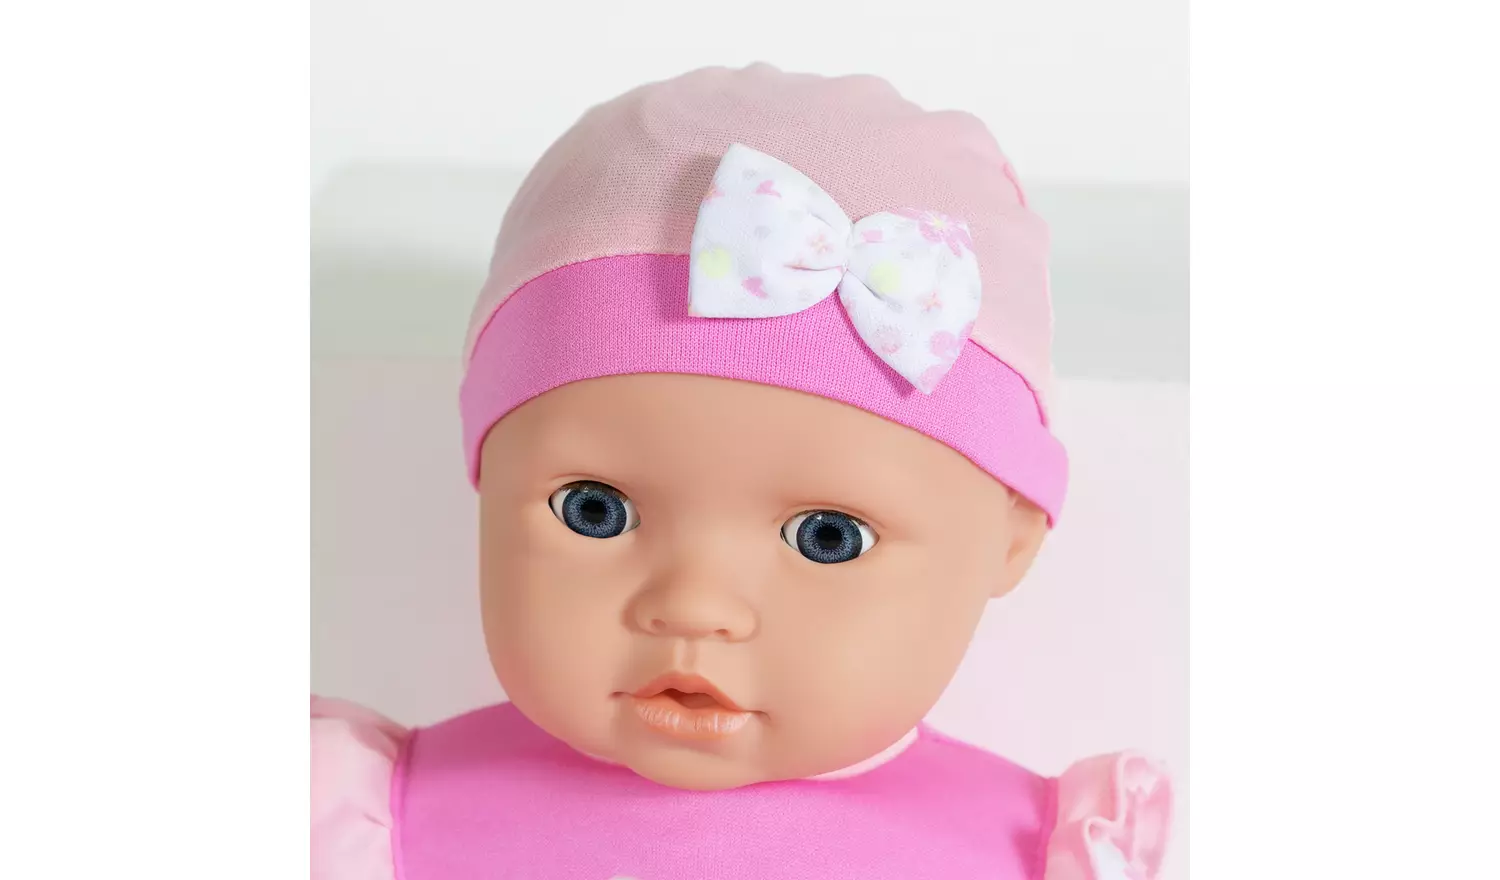 Chad Valley Babies to Love Cuddly Ava Doll - 15inch/40cm